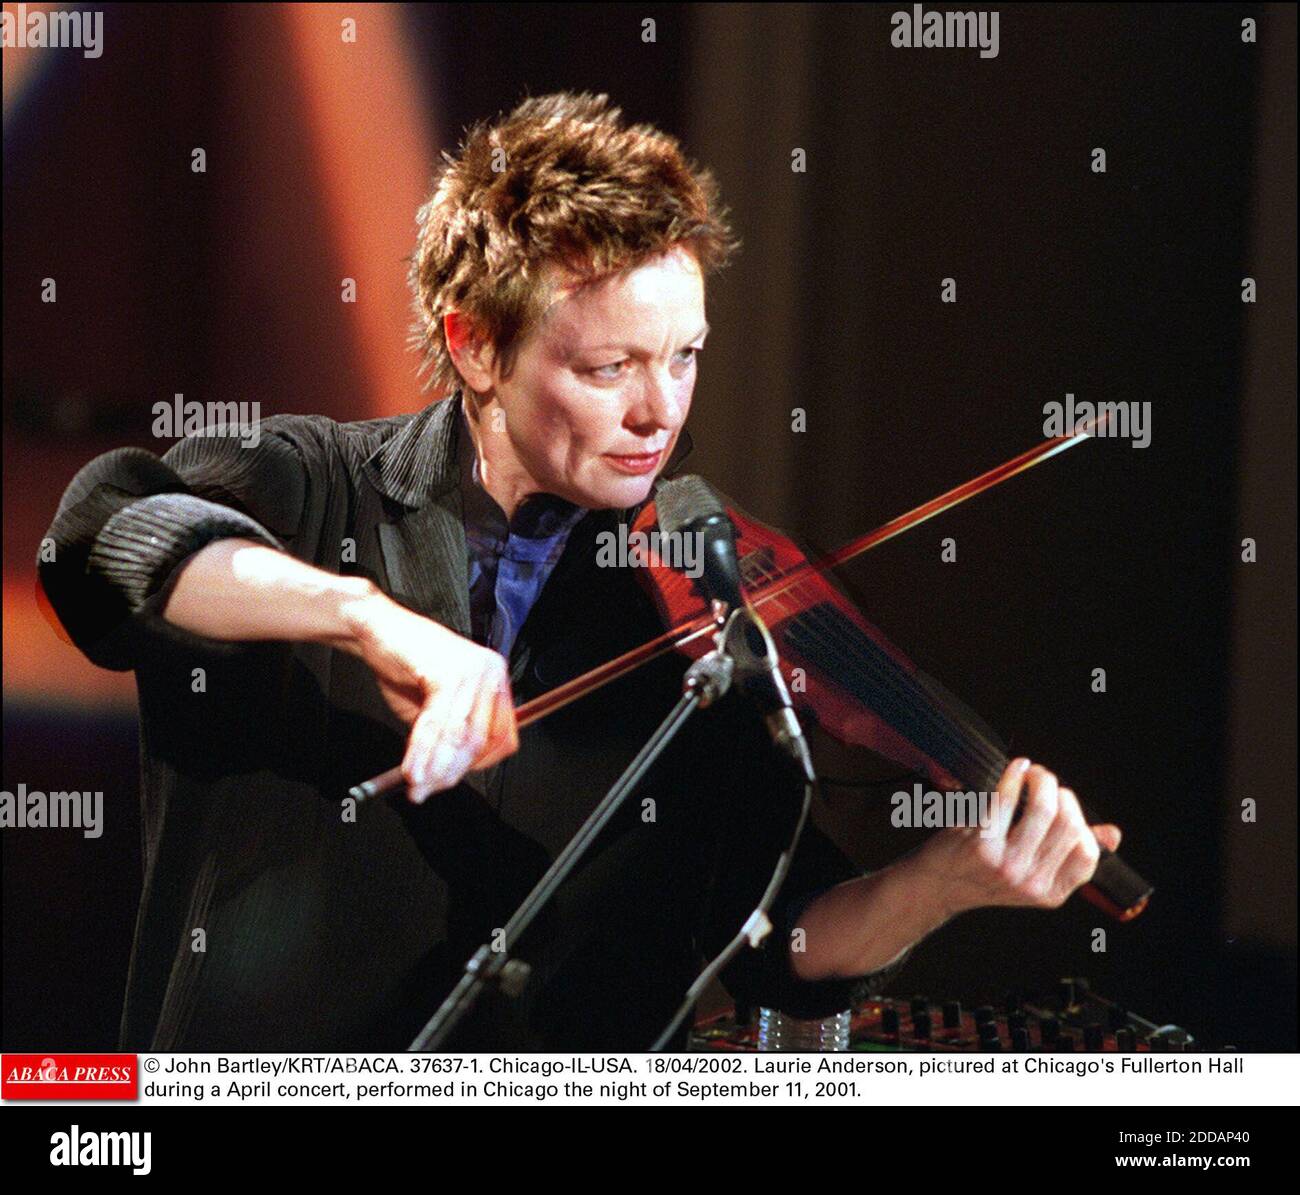 NO FILM, NO VIDEO, NO TV, NO DOCUMENTARY - © John Bartley/KRT/ABACA. 37637-1. Chicago-IL-USA. 18/04/2002. Laurie Anderson, pictured at Chicago's Fullerton Hall during a April concert, performed in Chicago the night of September 11, 2001. Stock Photo